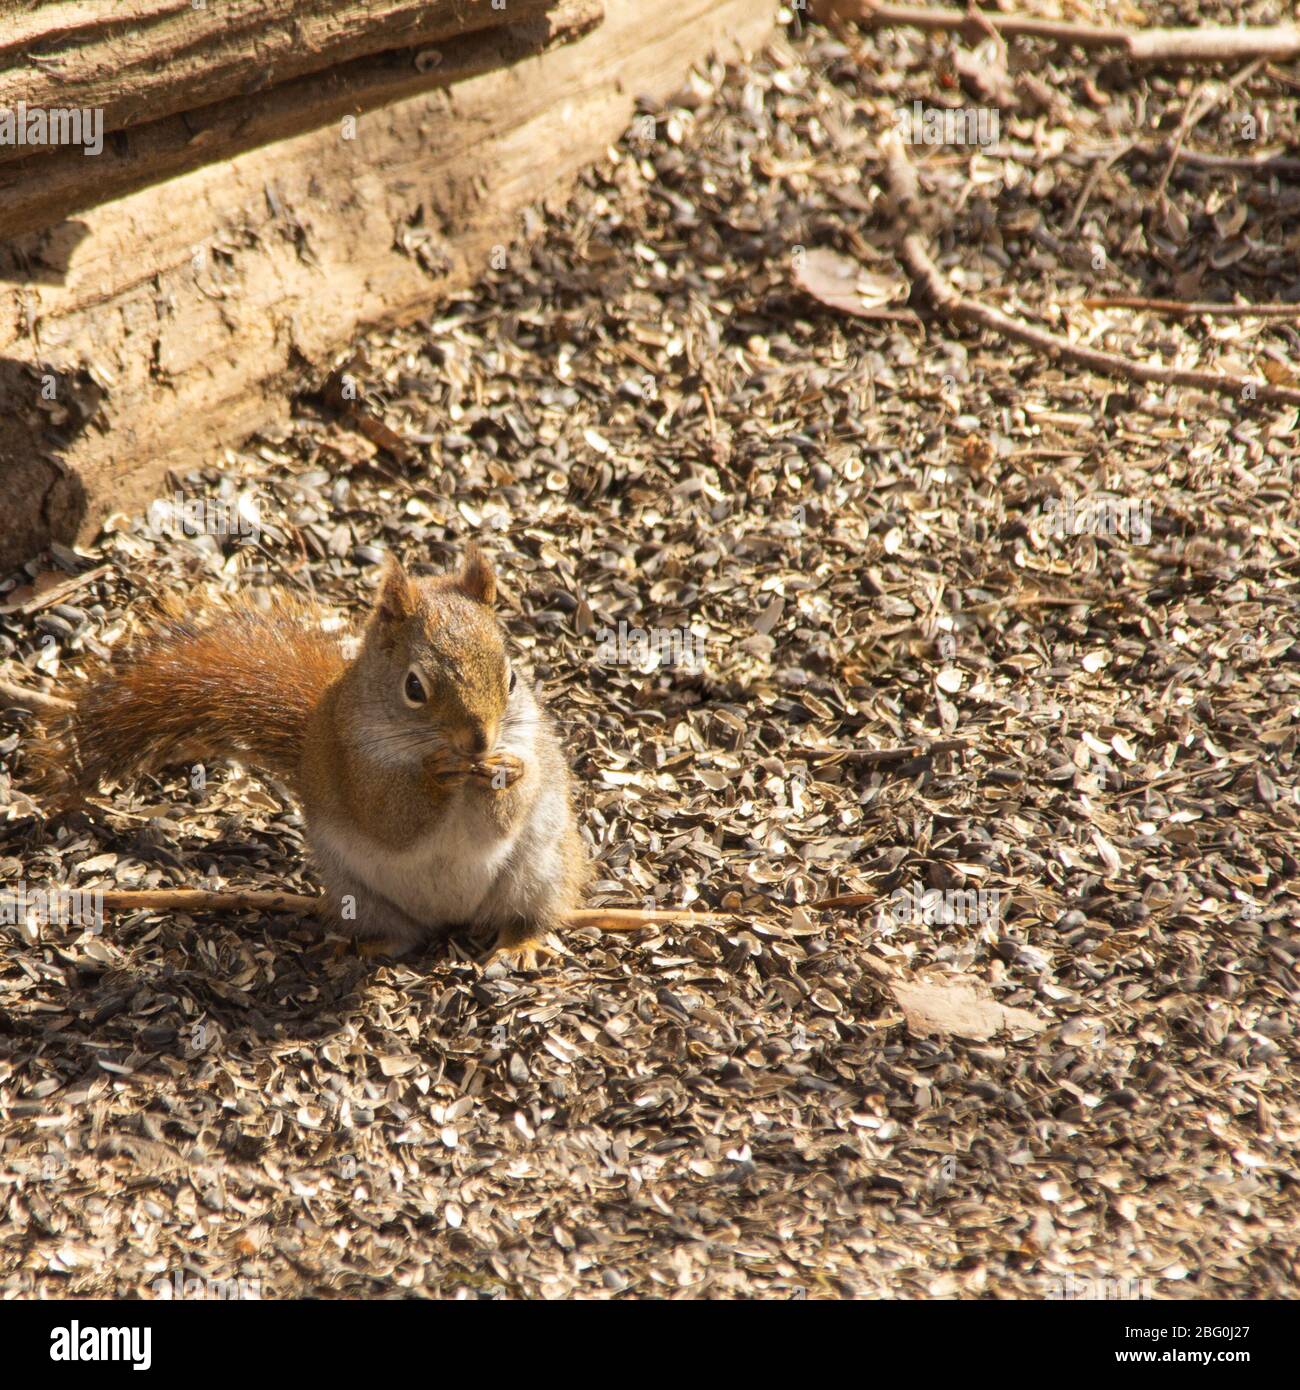 Red squirrel on ground eating sunflower seeds. Stock Photo